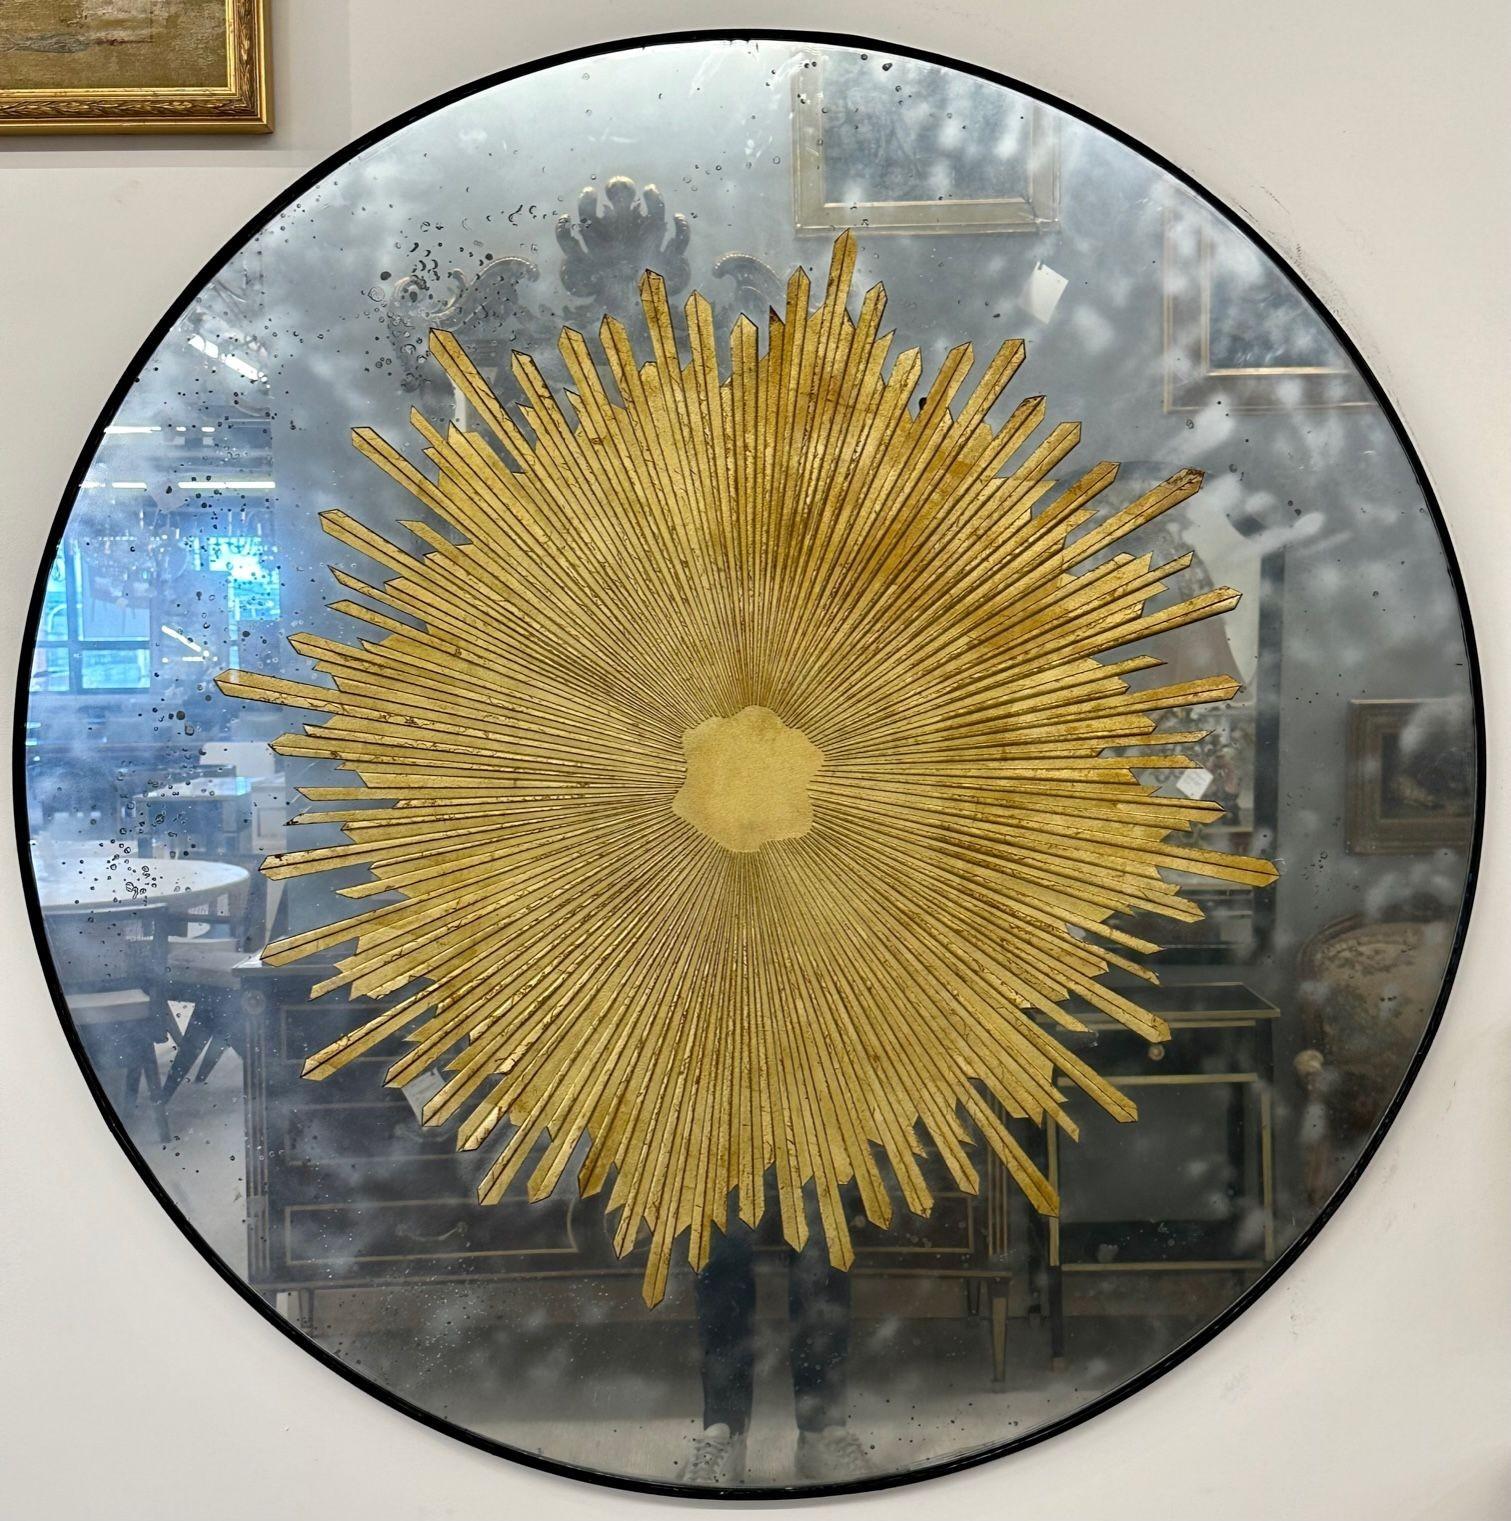 Pair of Monumental Gilt gold and silver glass sunburst mirrors, Antiqued Mirror
 
A pair of monumental, carved gilt gold and silver glass sunburst wall mirrors or table tops. These spectacular, finely ornamented and antiqued mirrors make a